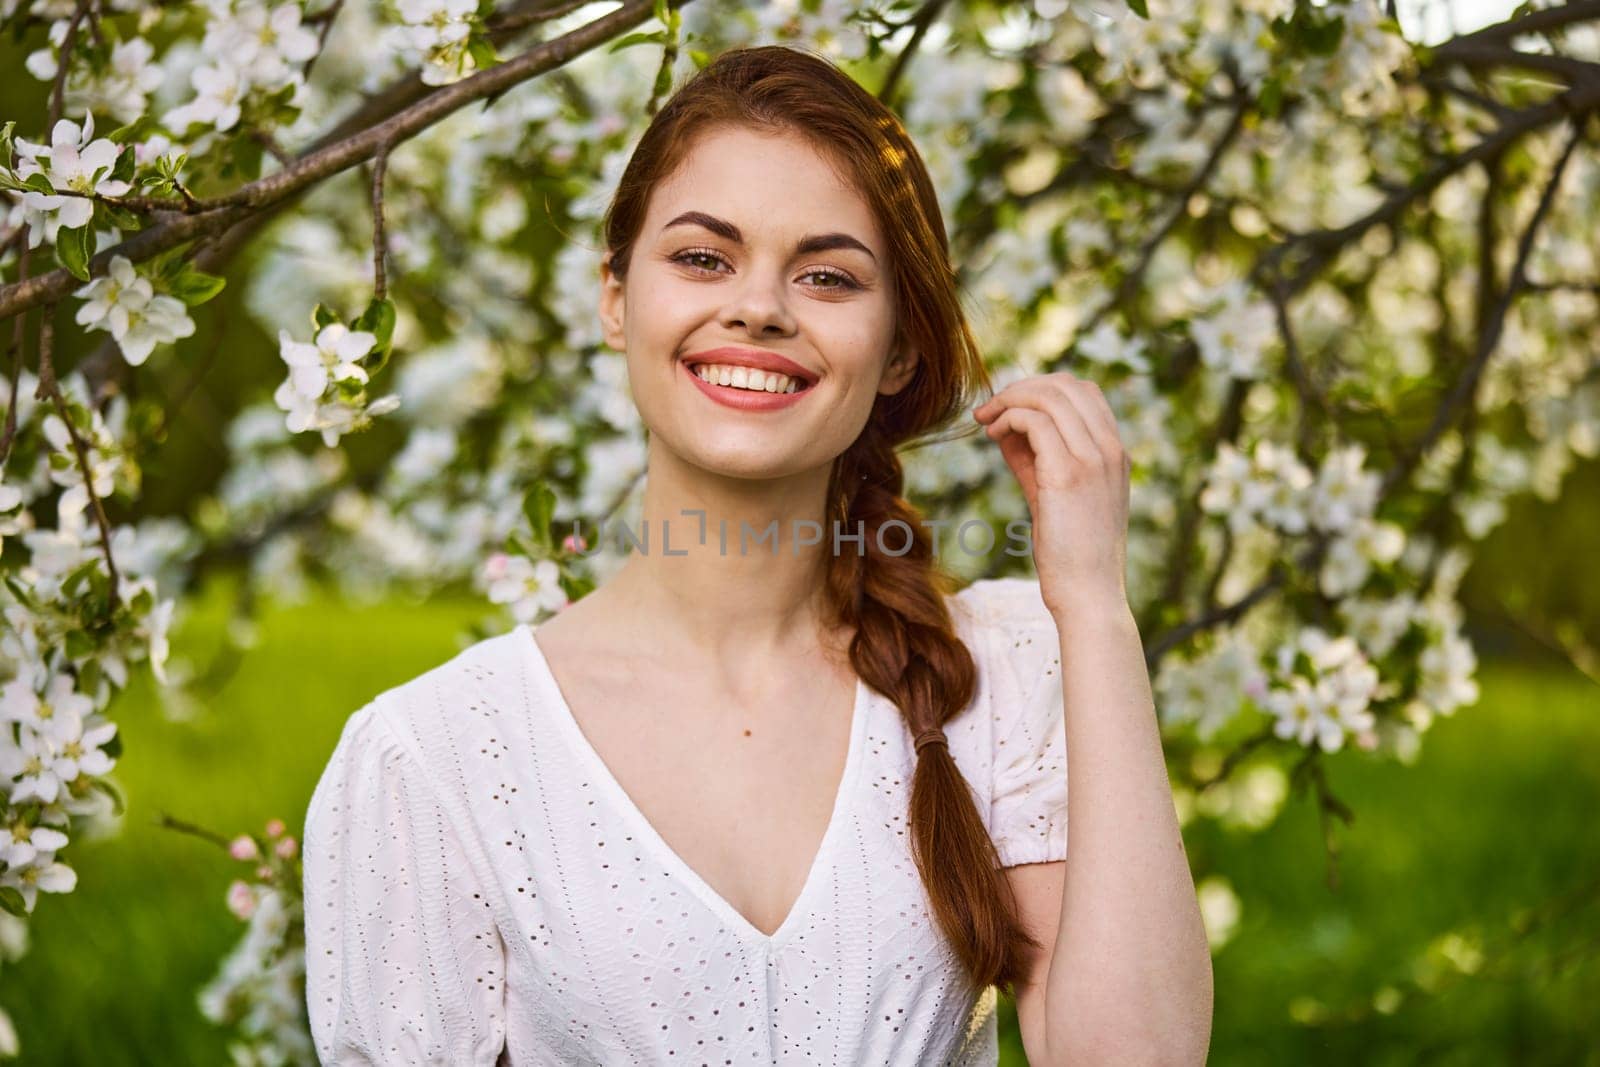 a joyful, carefree woman in a light dress stands against the background of a flowering tree. High quality photo